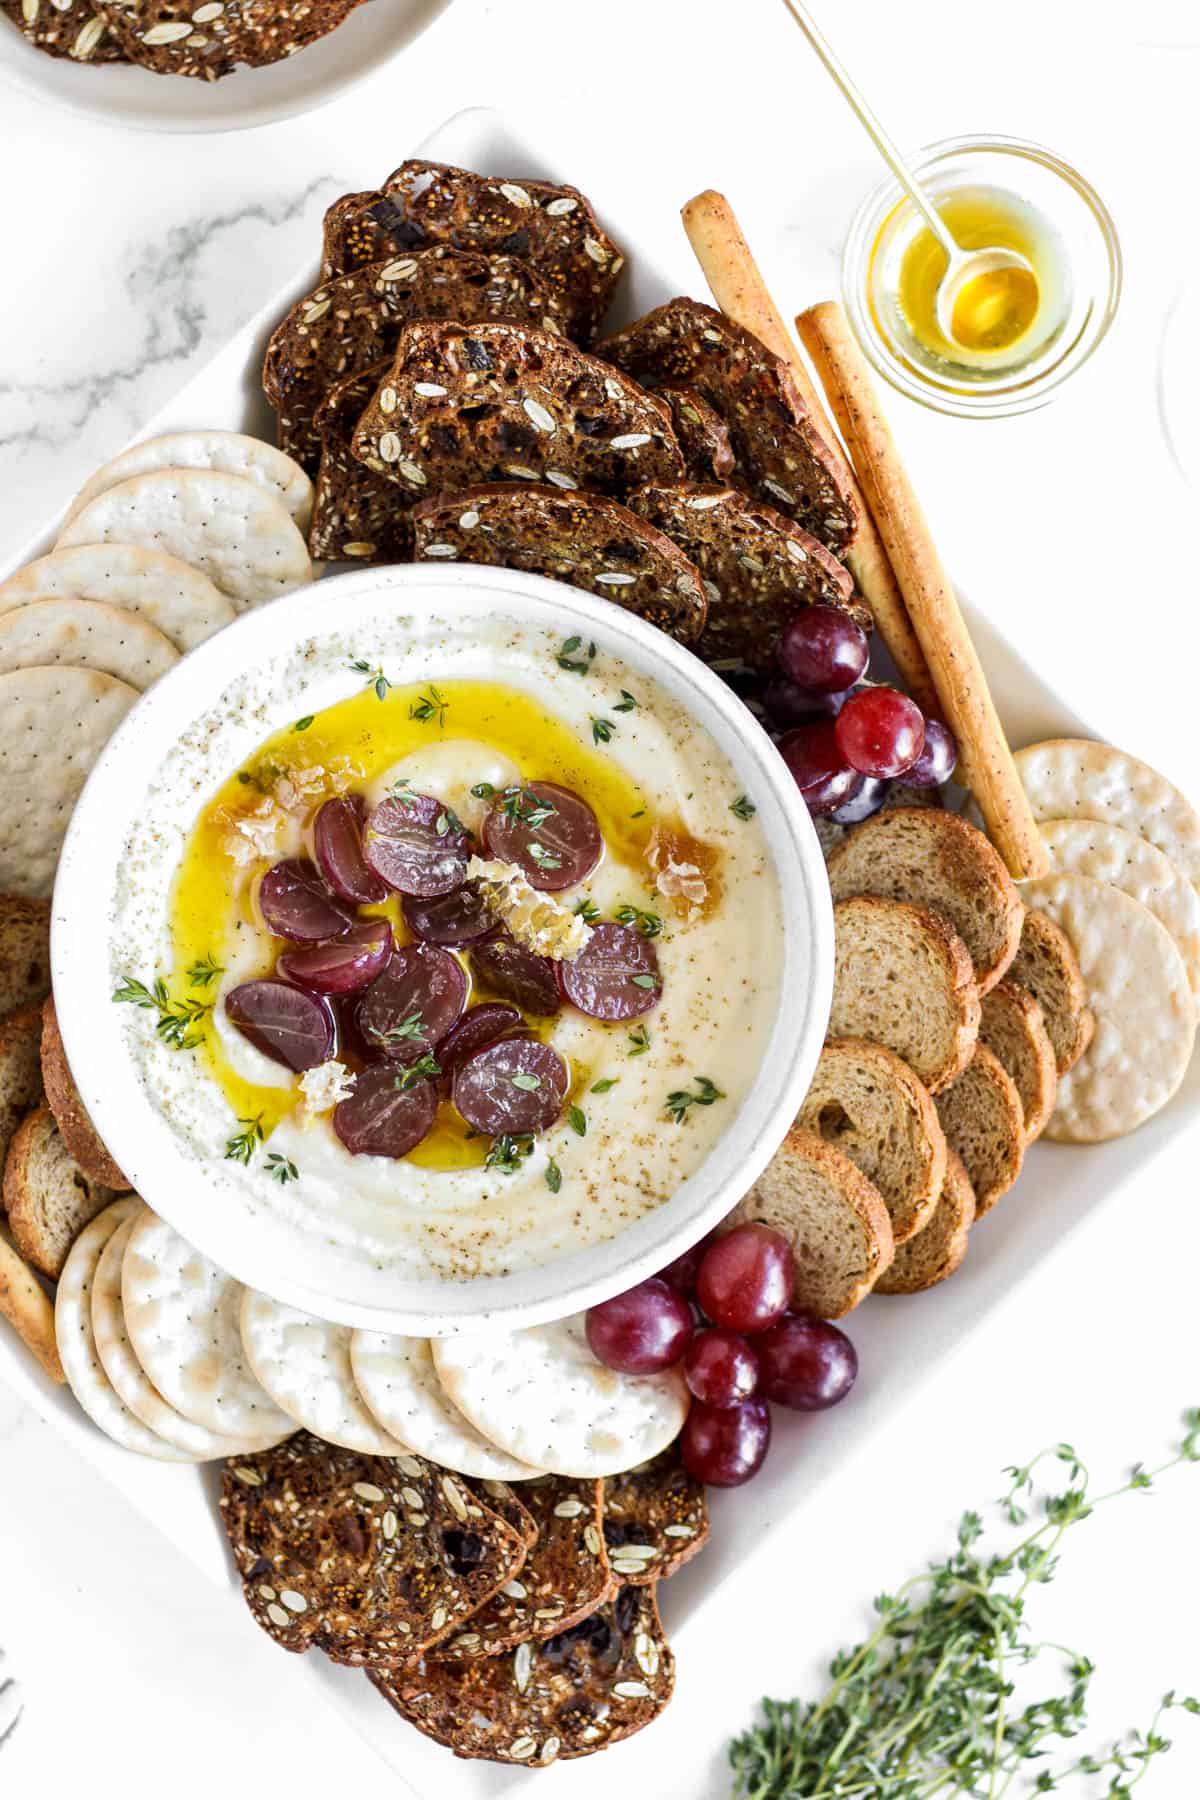 Whipped ricotta dip topped with grapes and honeycomb.